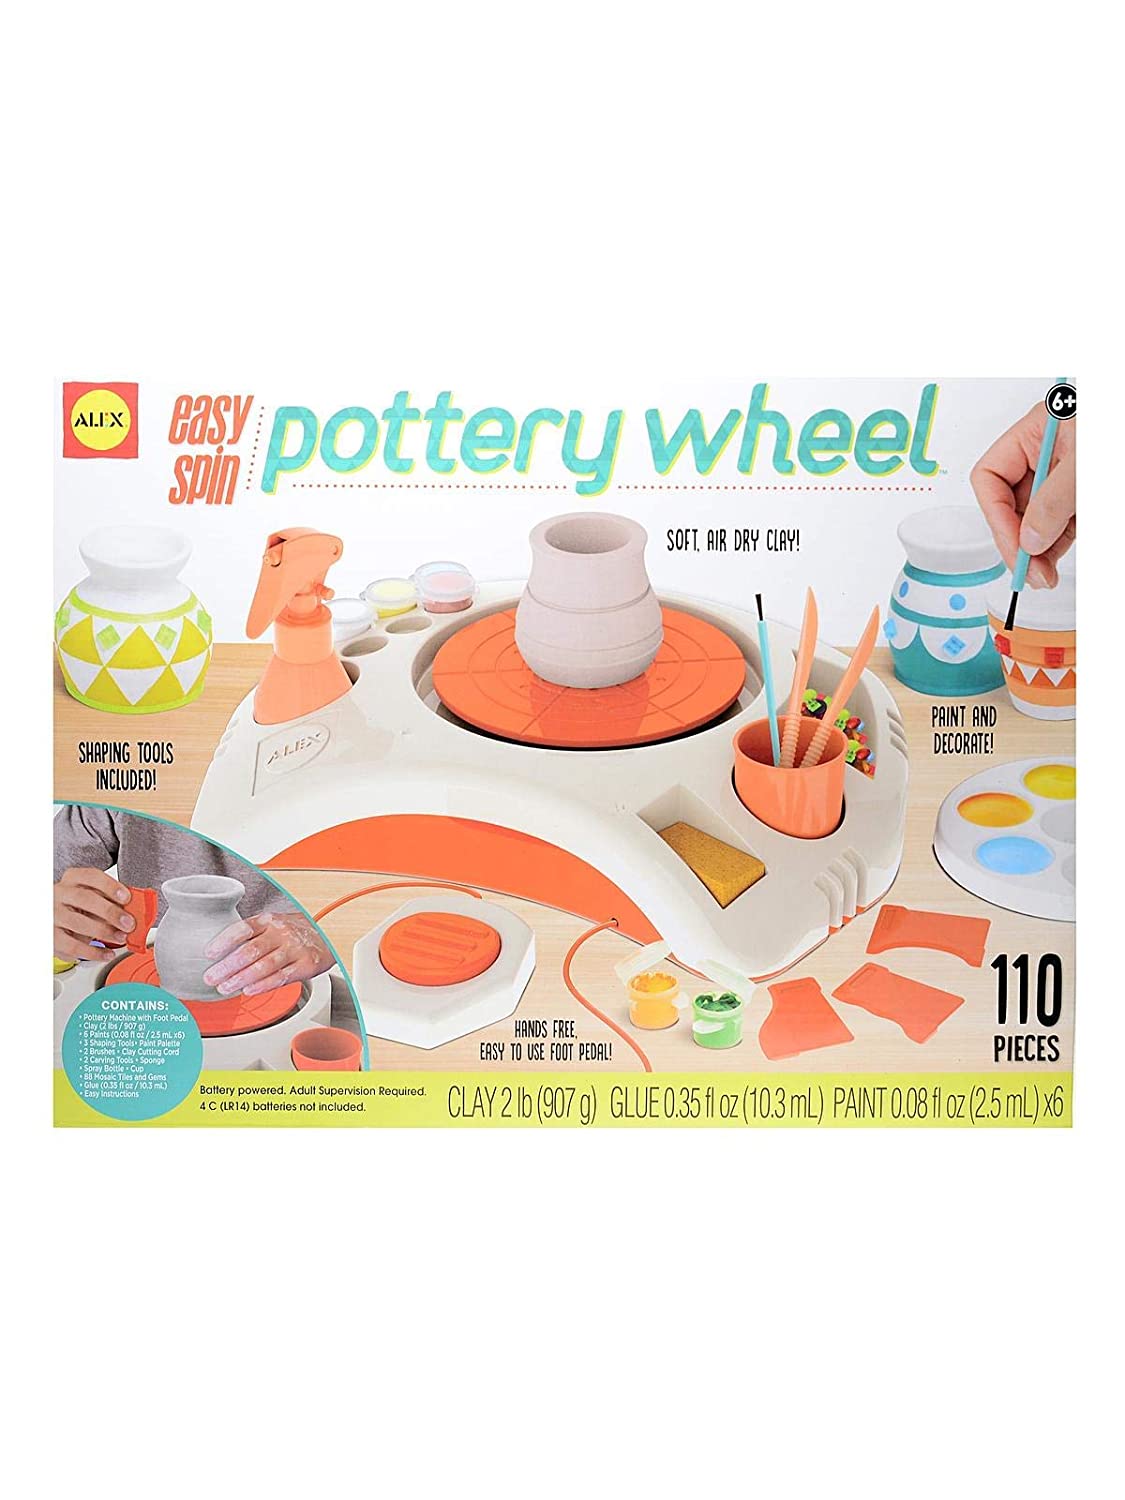 Top 7 Best Pottery Wheels for Kids Reviews in 2022 6